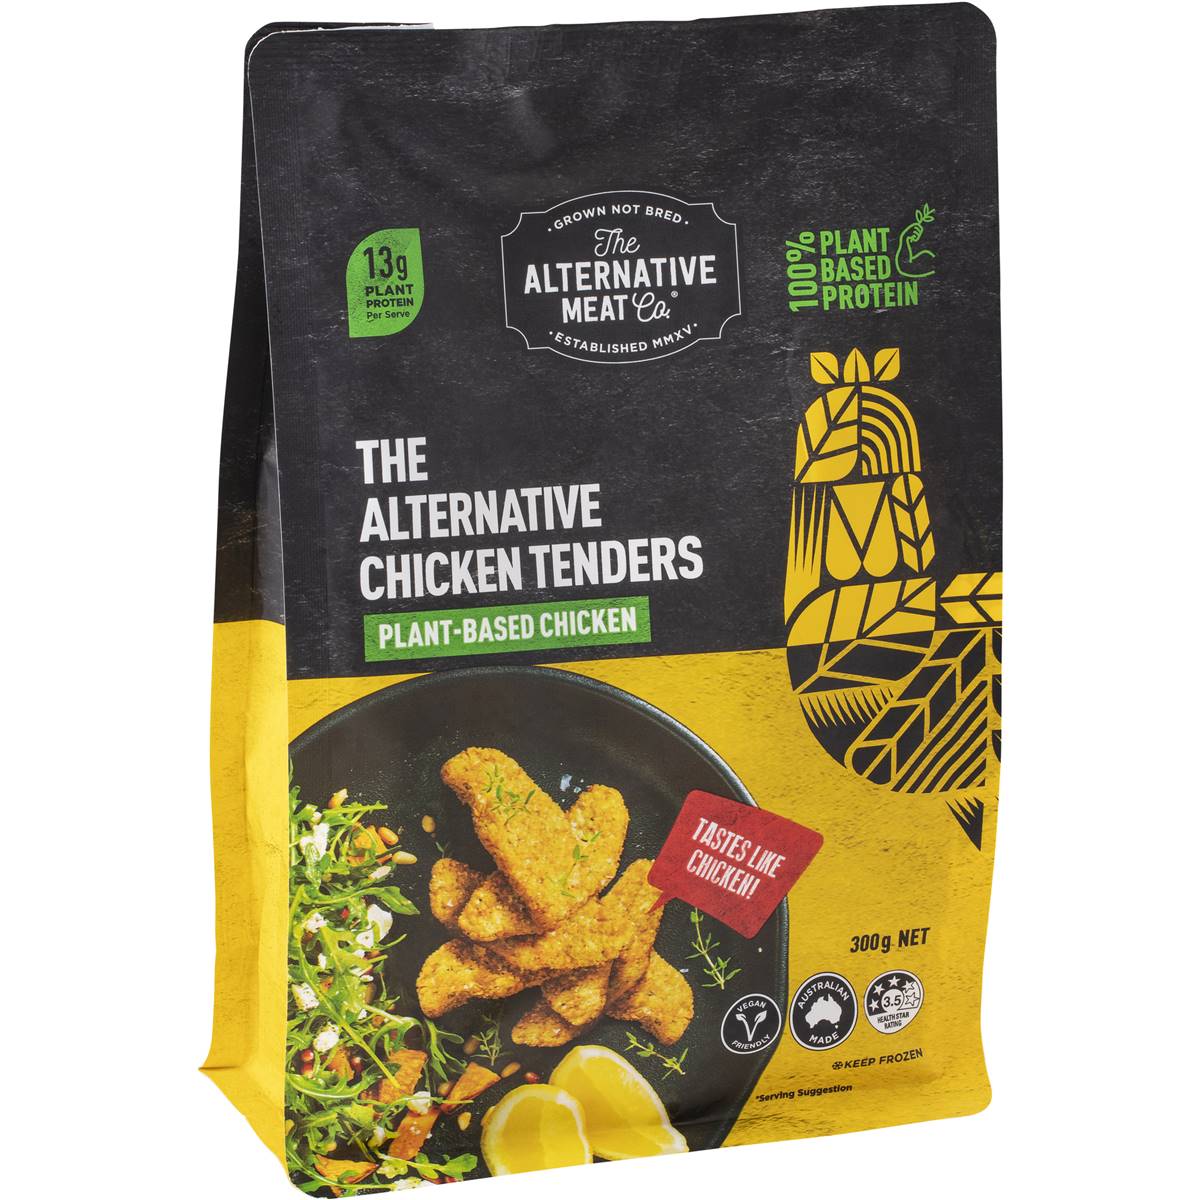 Calories in The Alternative Meat Co The Alternative Chicken Tenders Plant Based Chicken